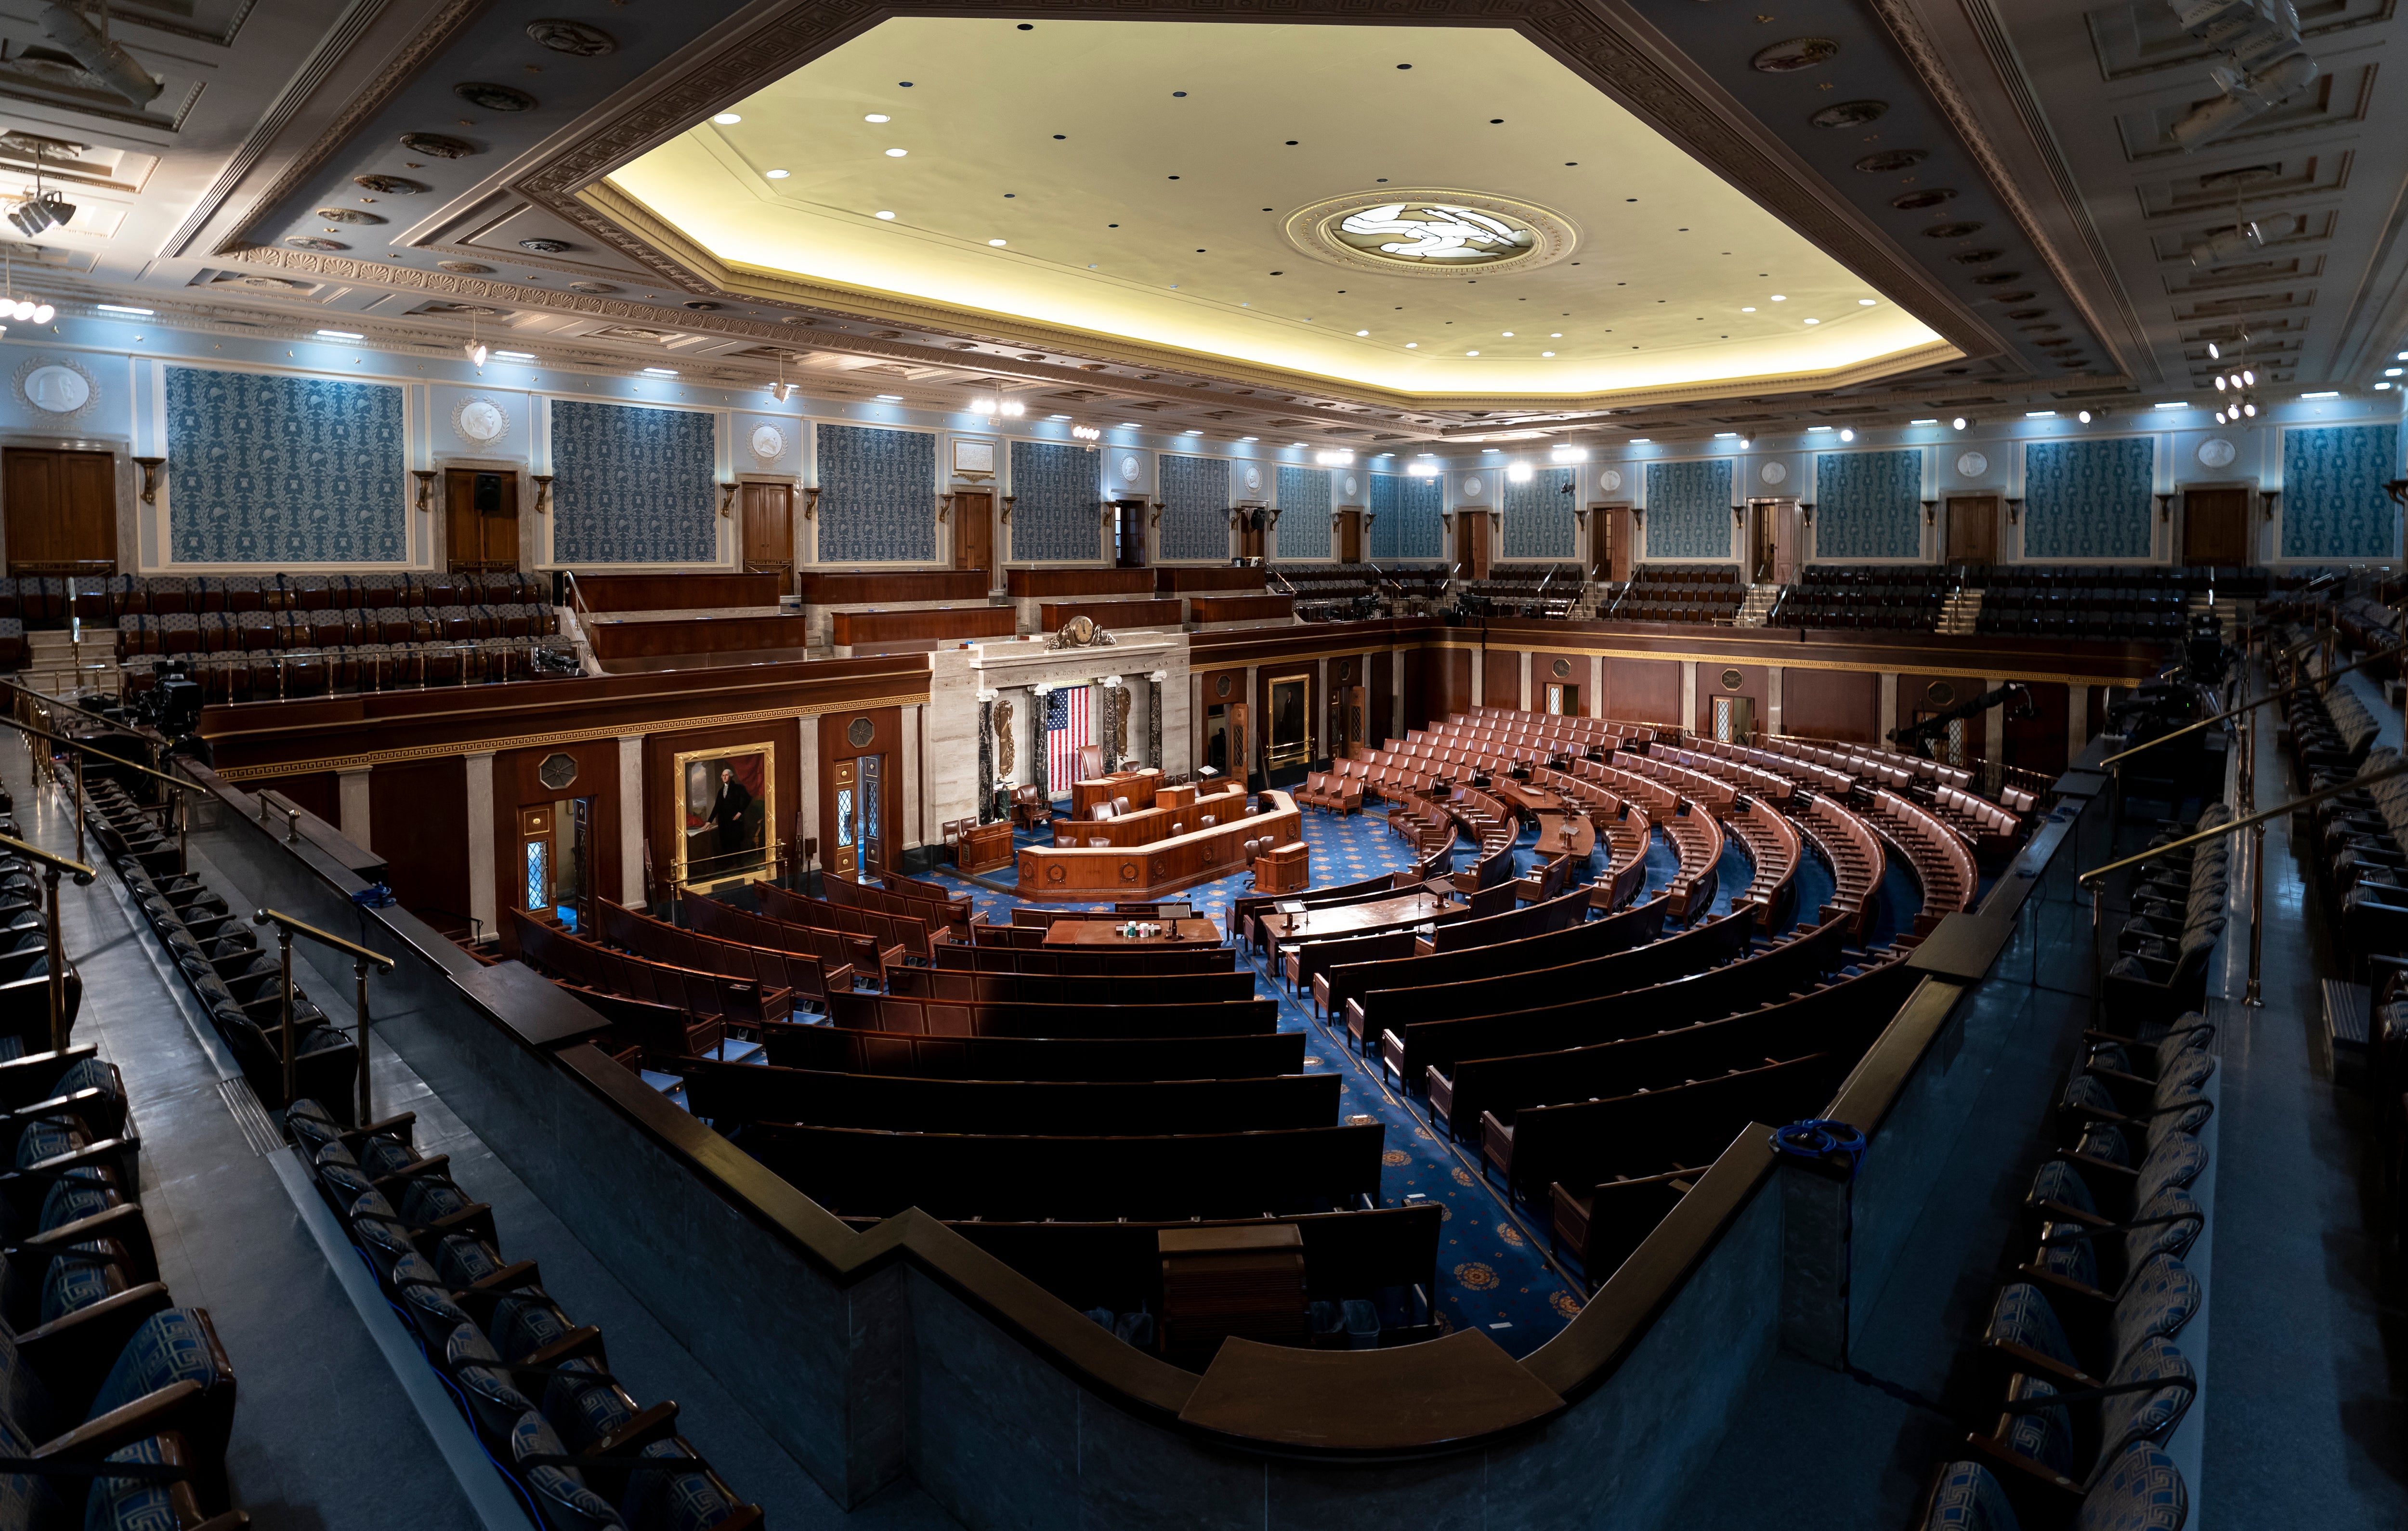 Heaven is (not) a place on earth: the House of Representatives